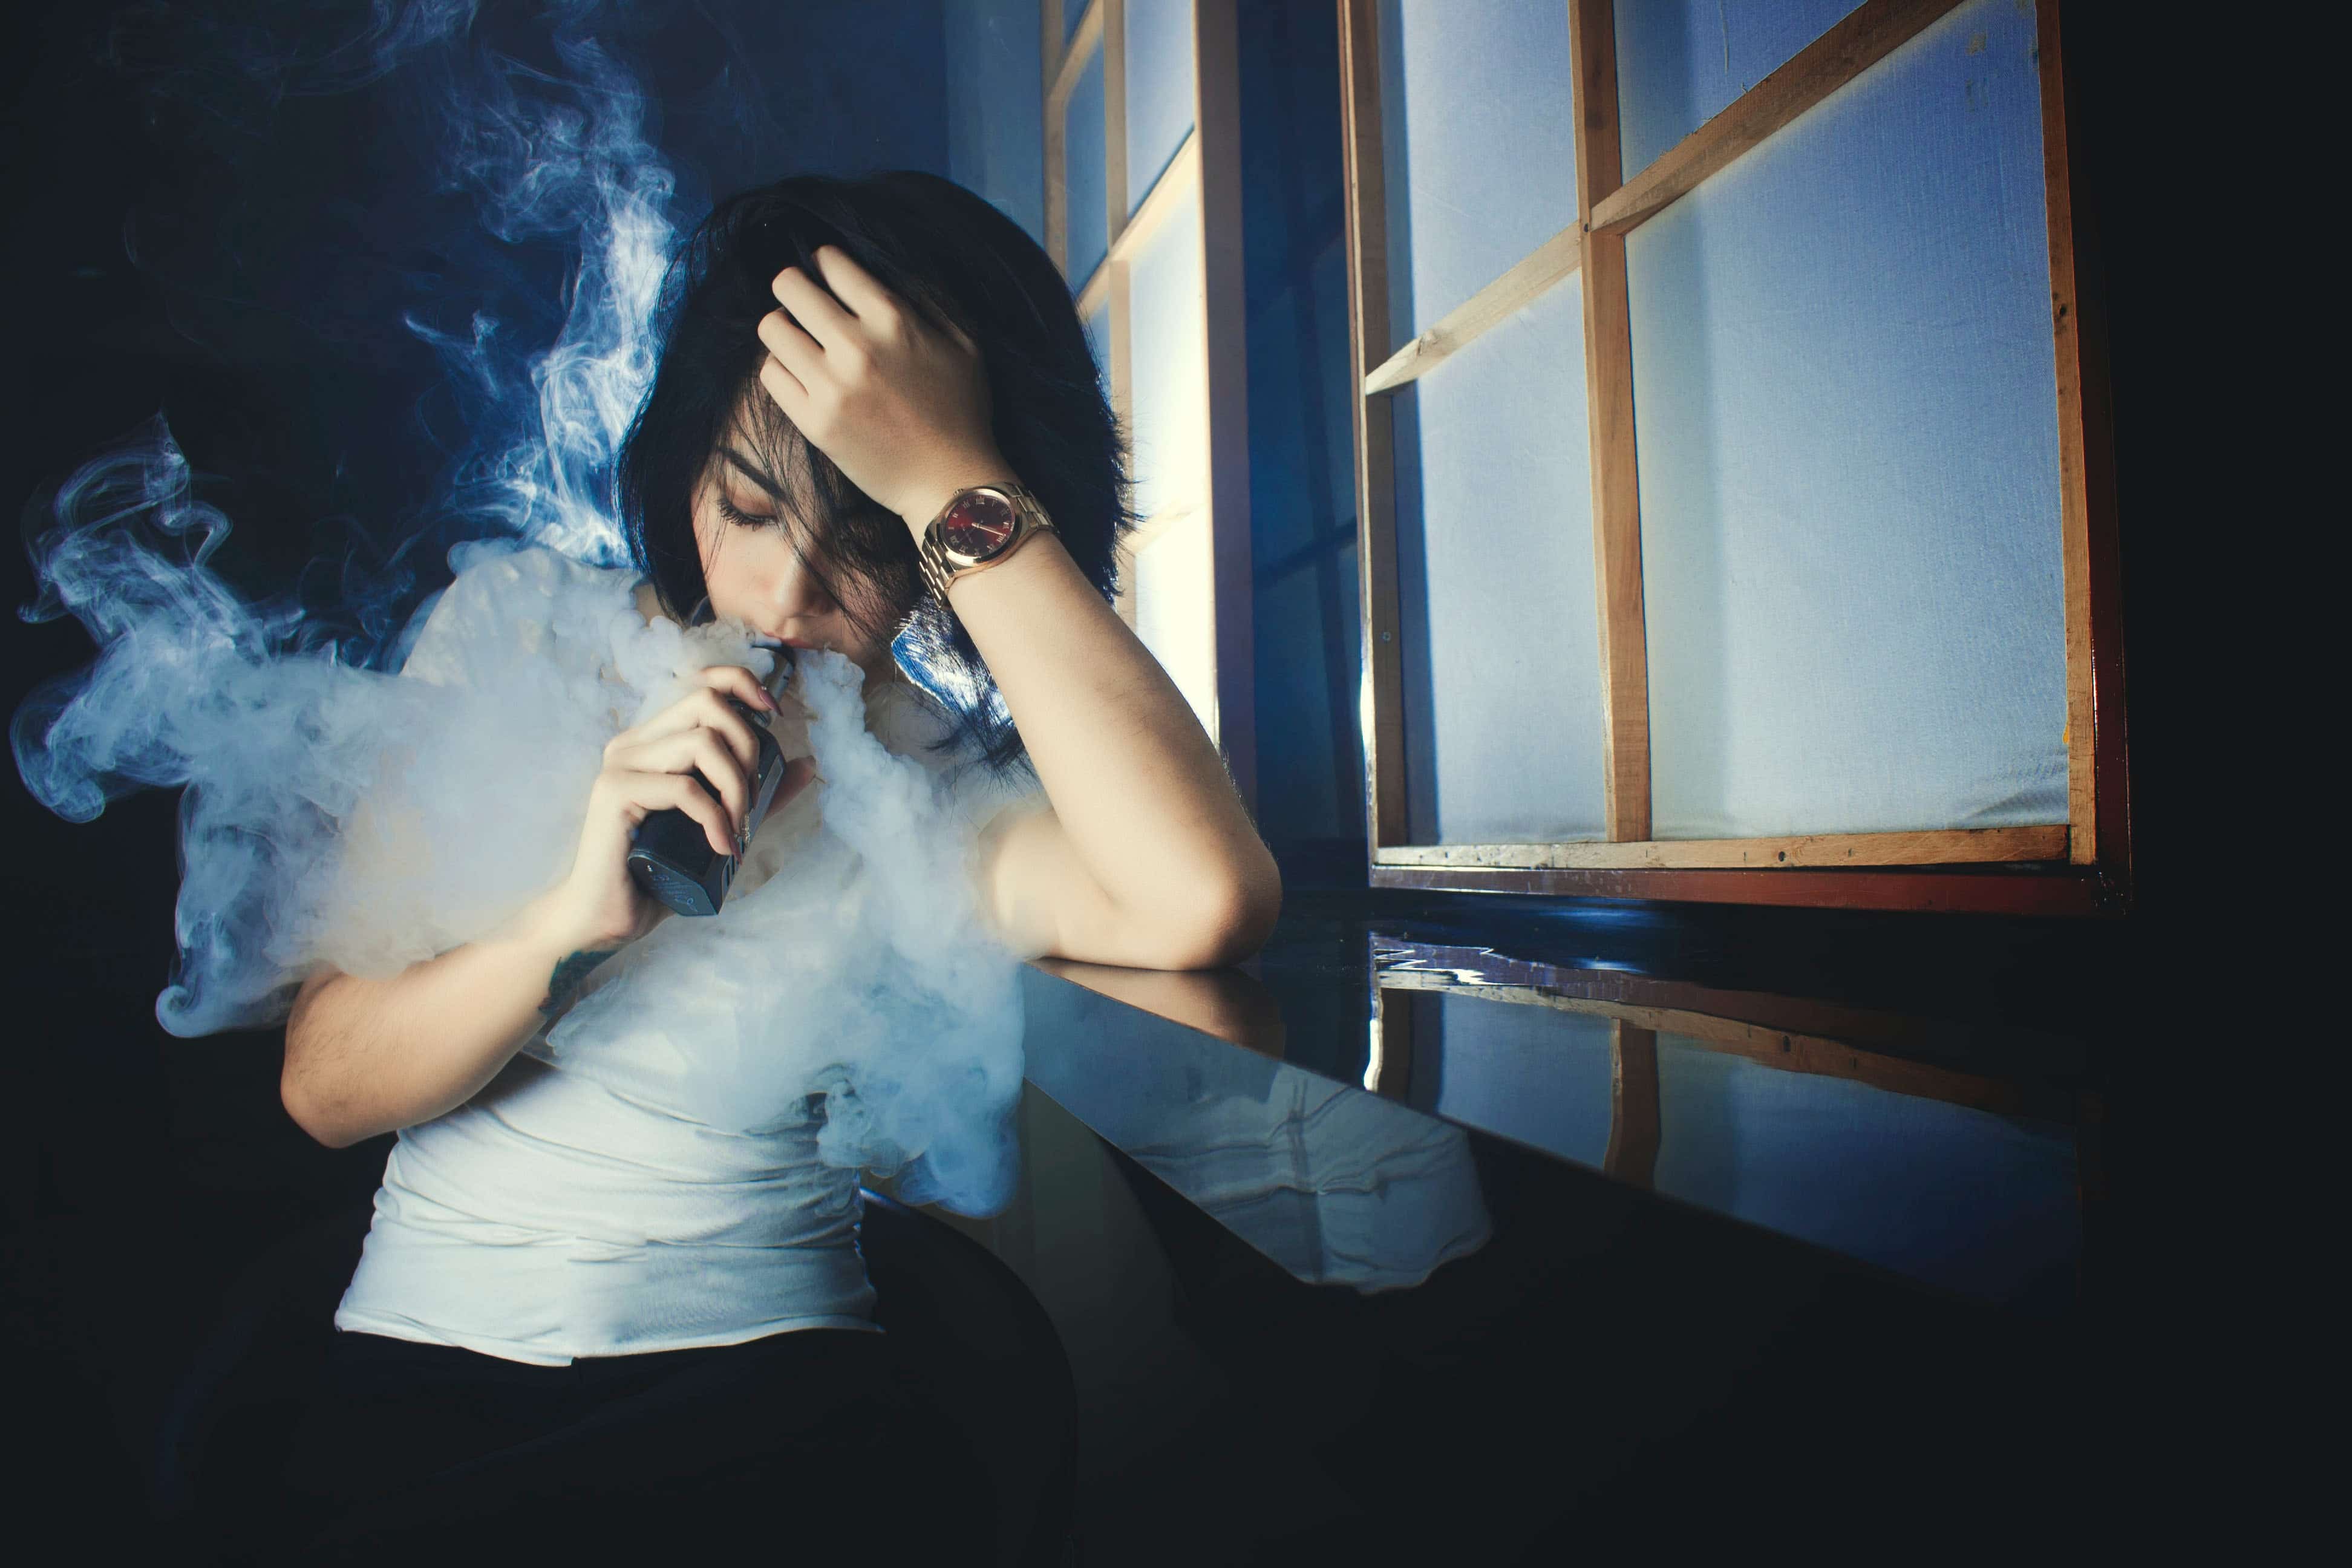 The Complete Guide to E-Cigs and Why They’re Just as Bad as Smoking